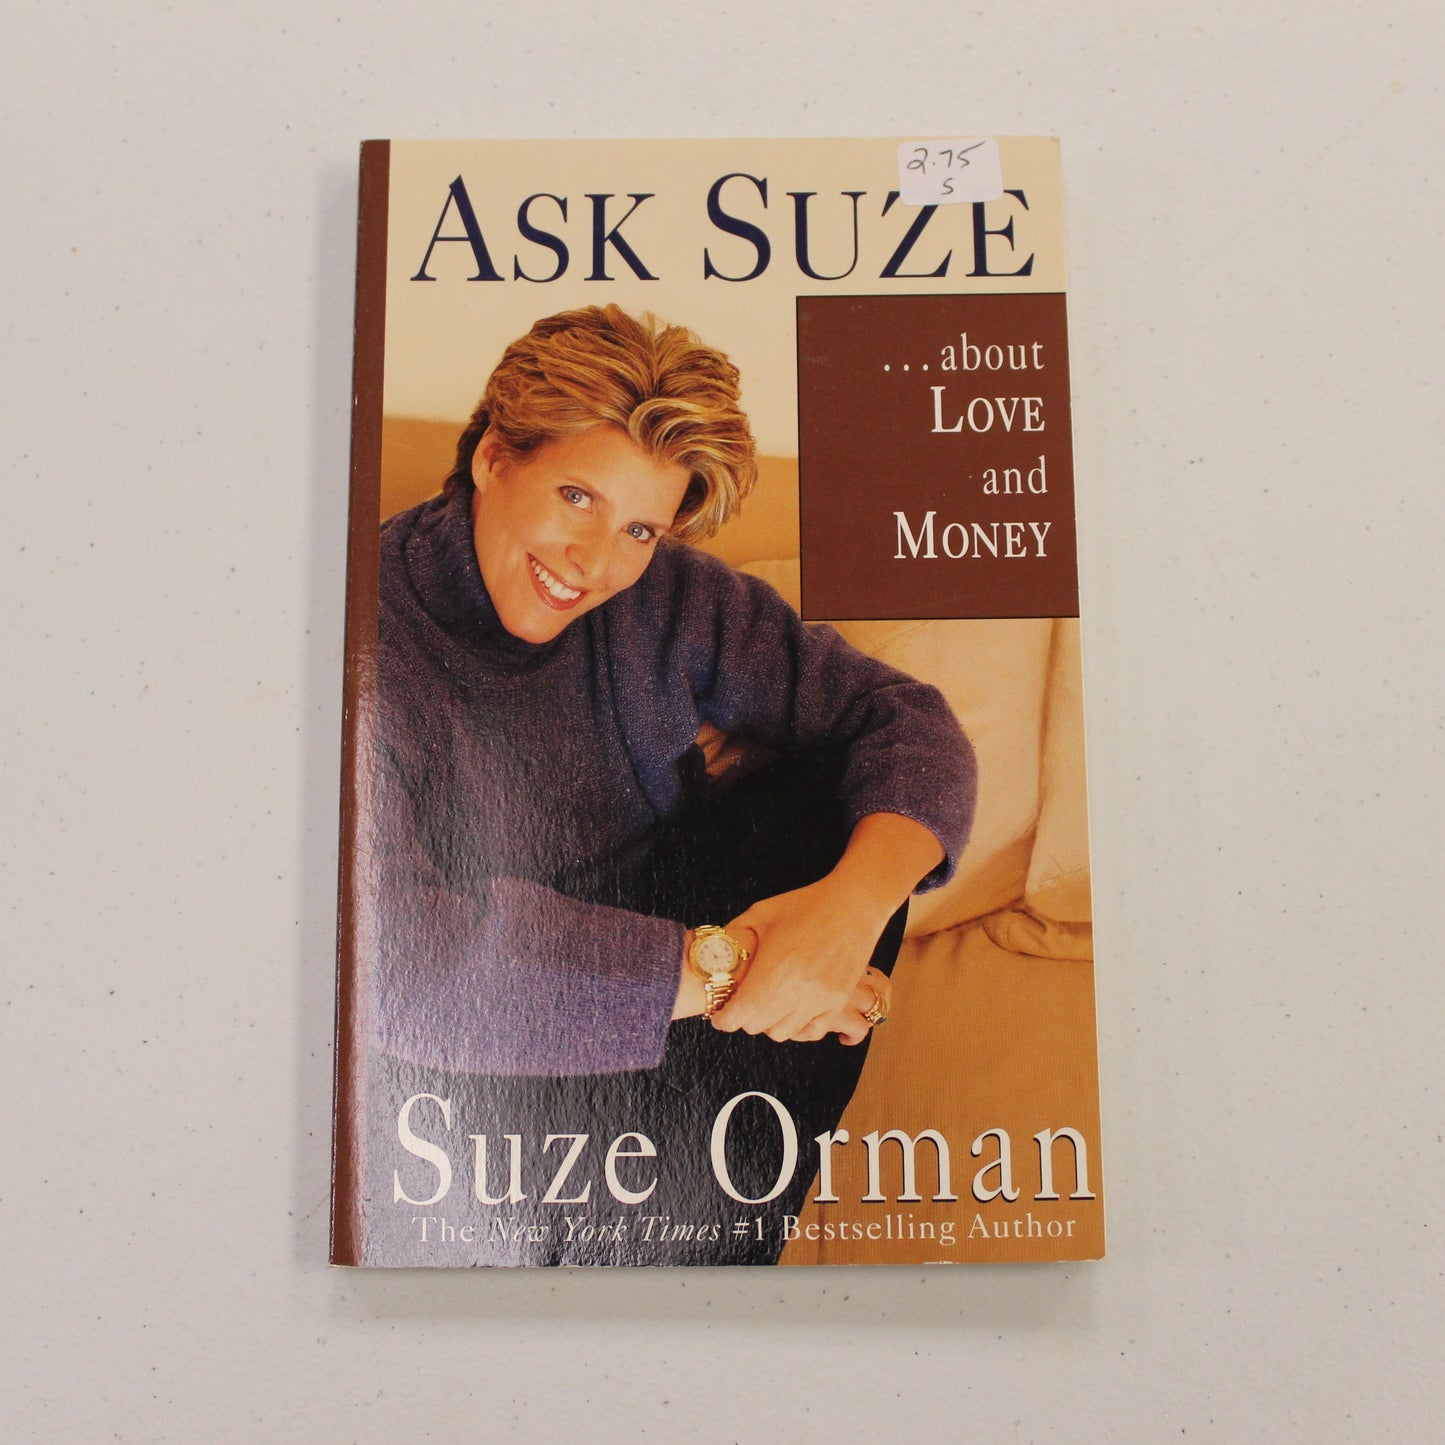 ASK SUZE ABOUT LOVE AND MONEY